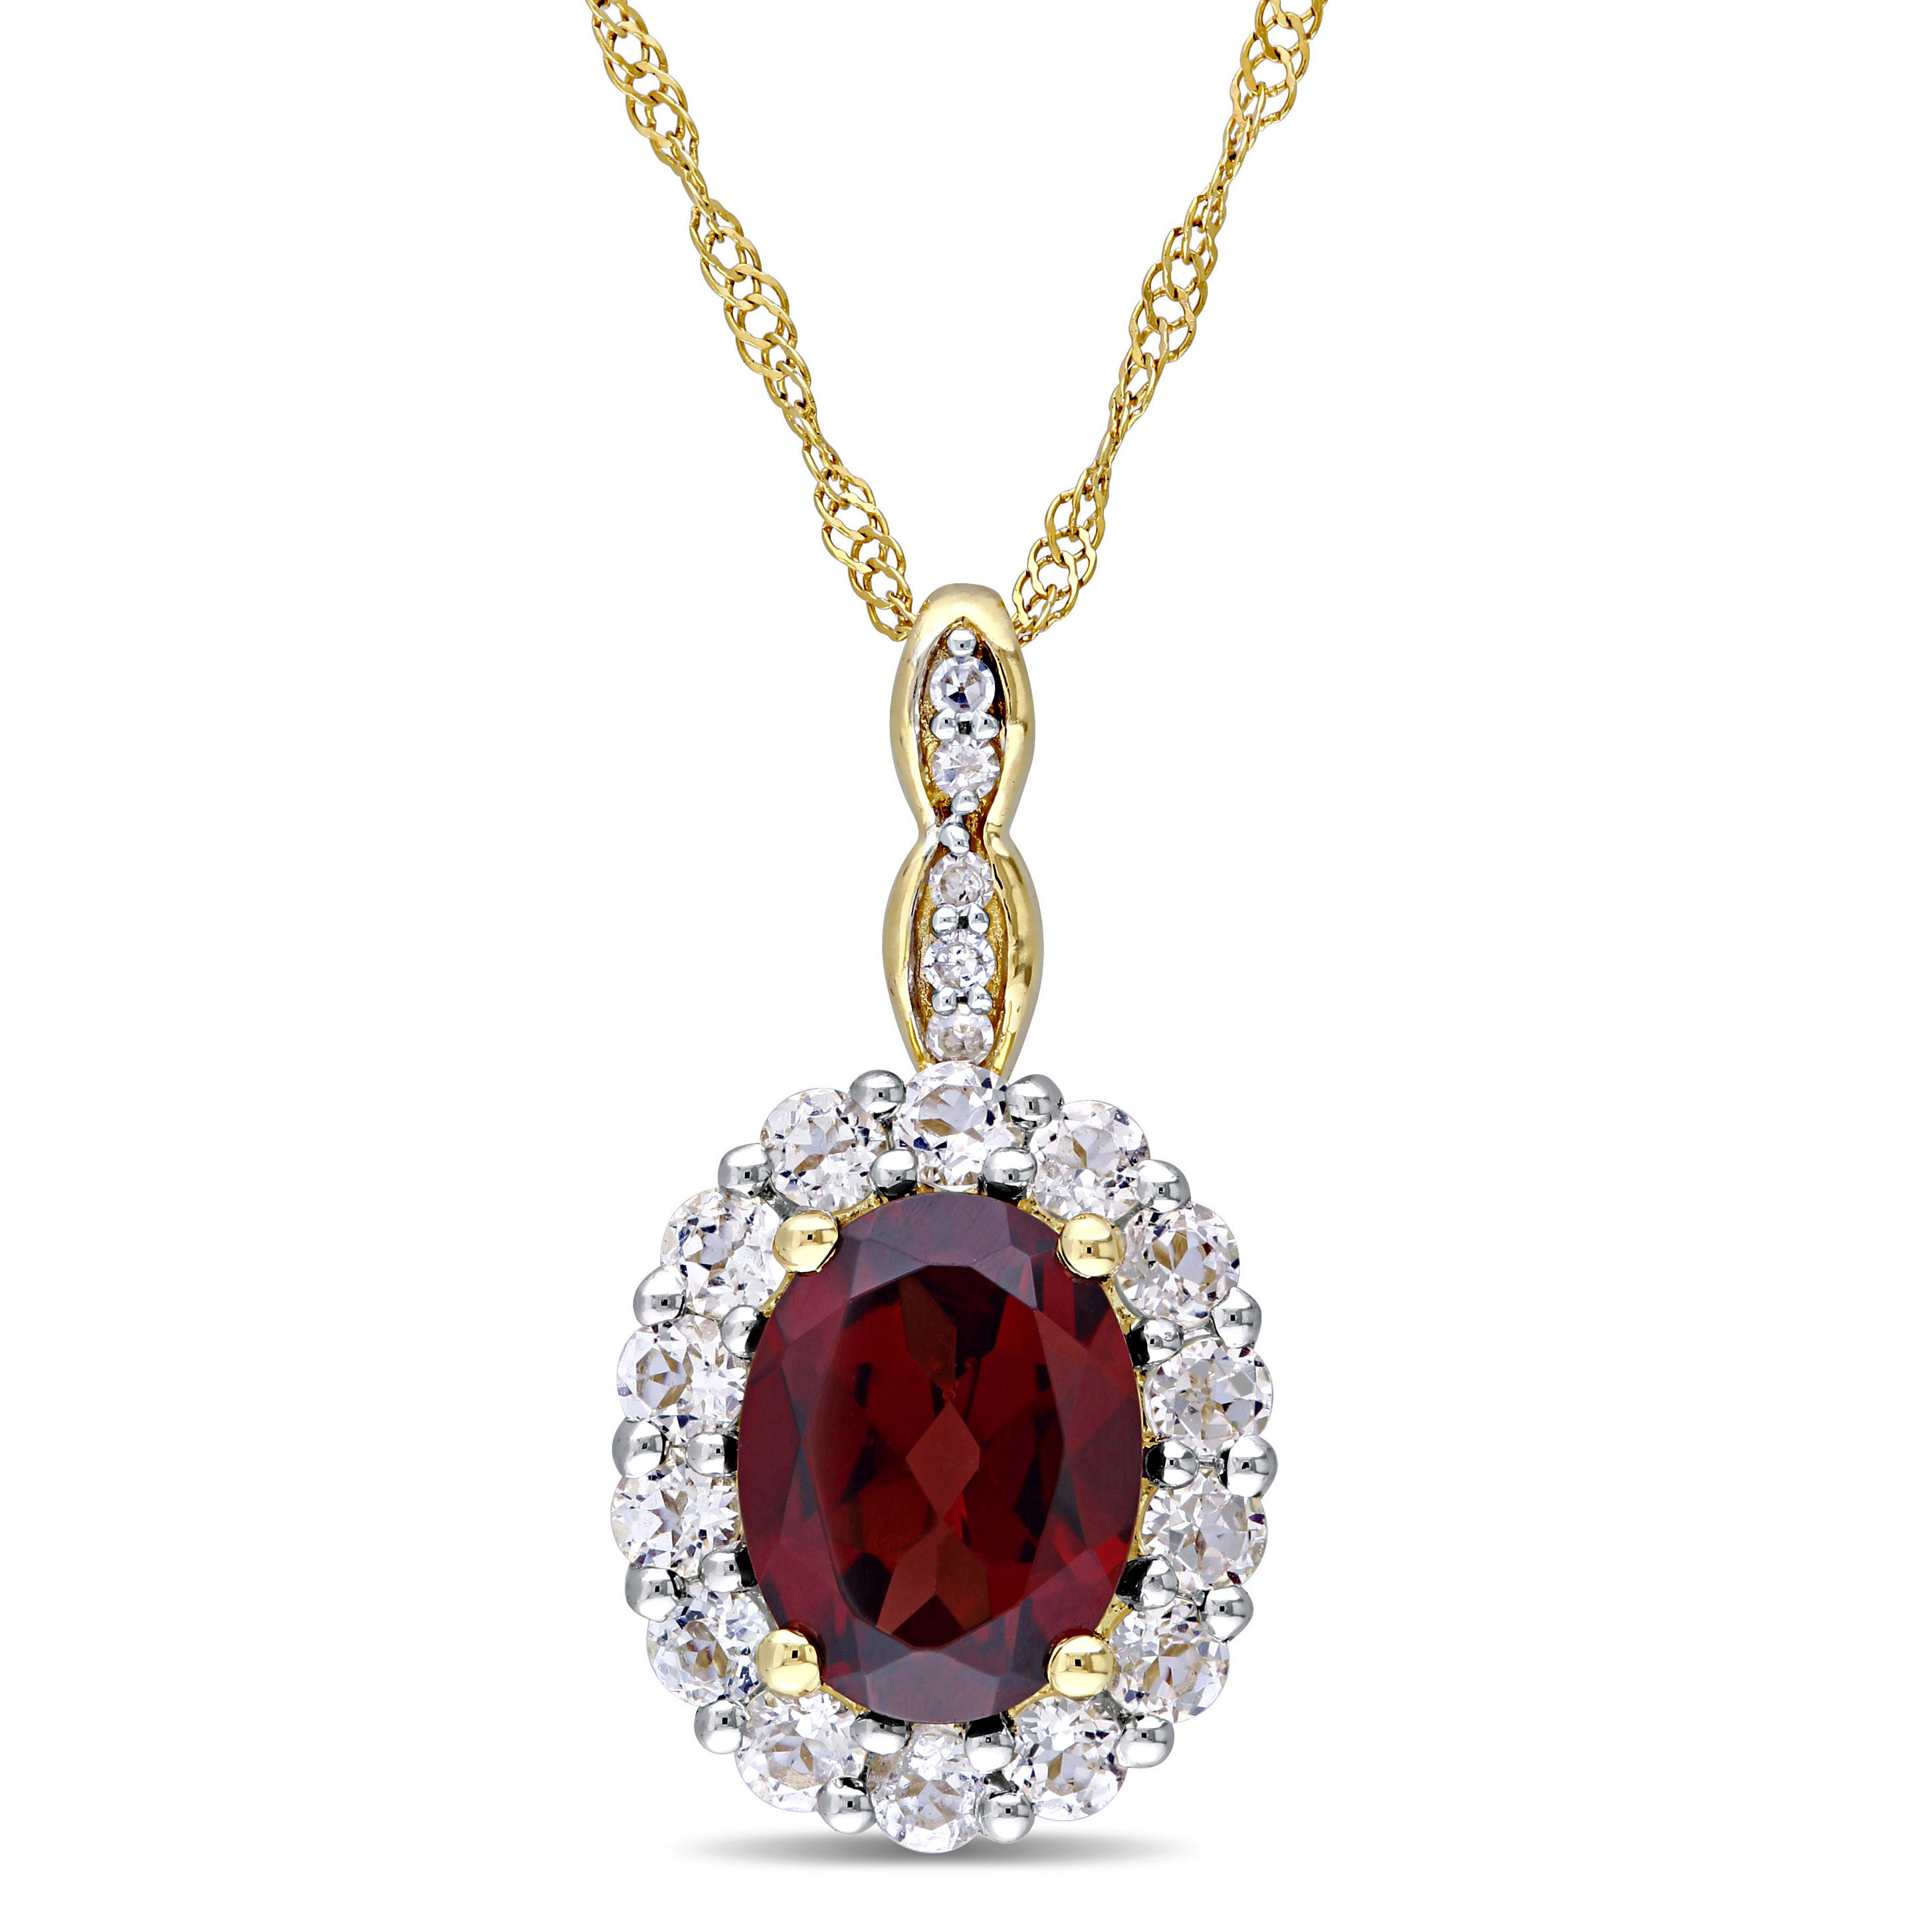 Oval Shape Garnet, White Topaz, and Diamond Accent Vintage Pendant with Chain in 14k Yellow Gold